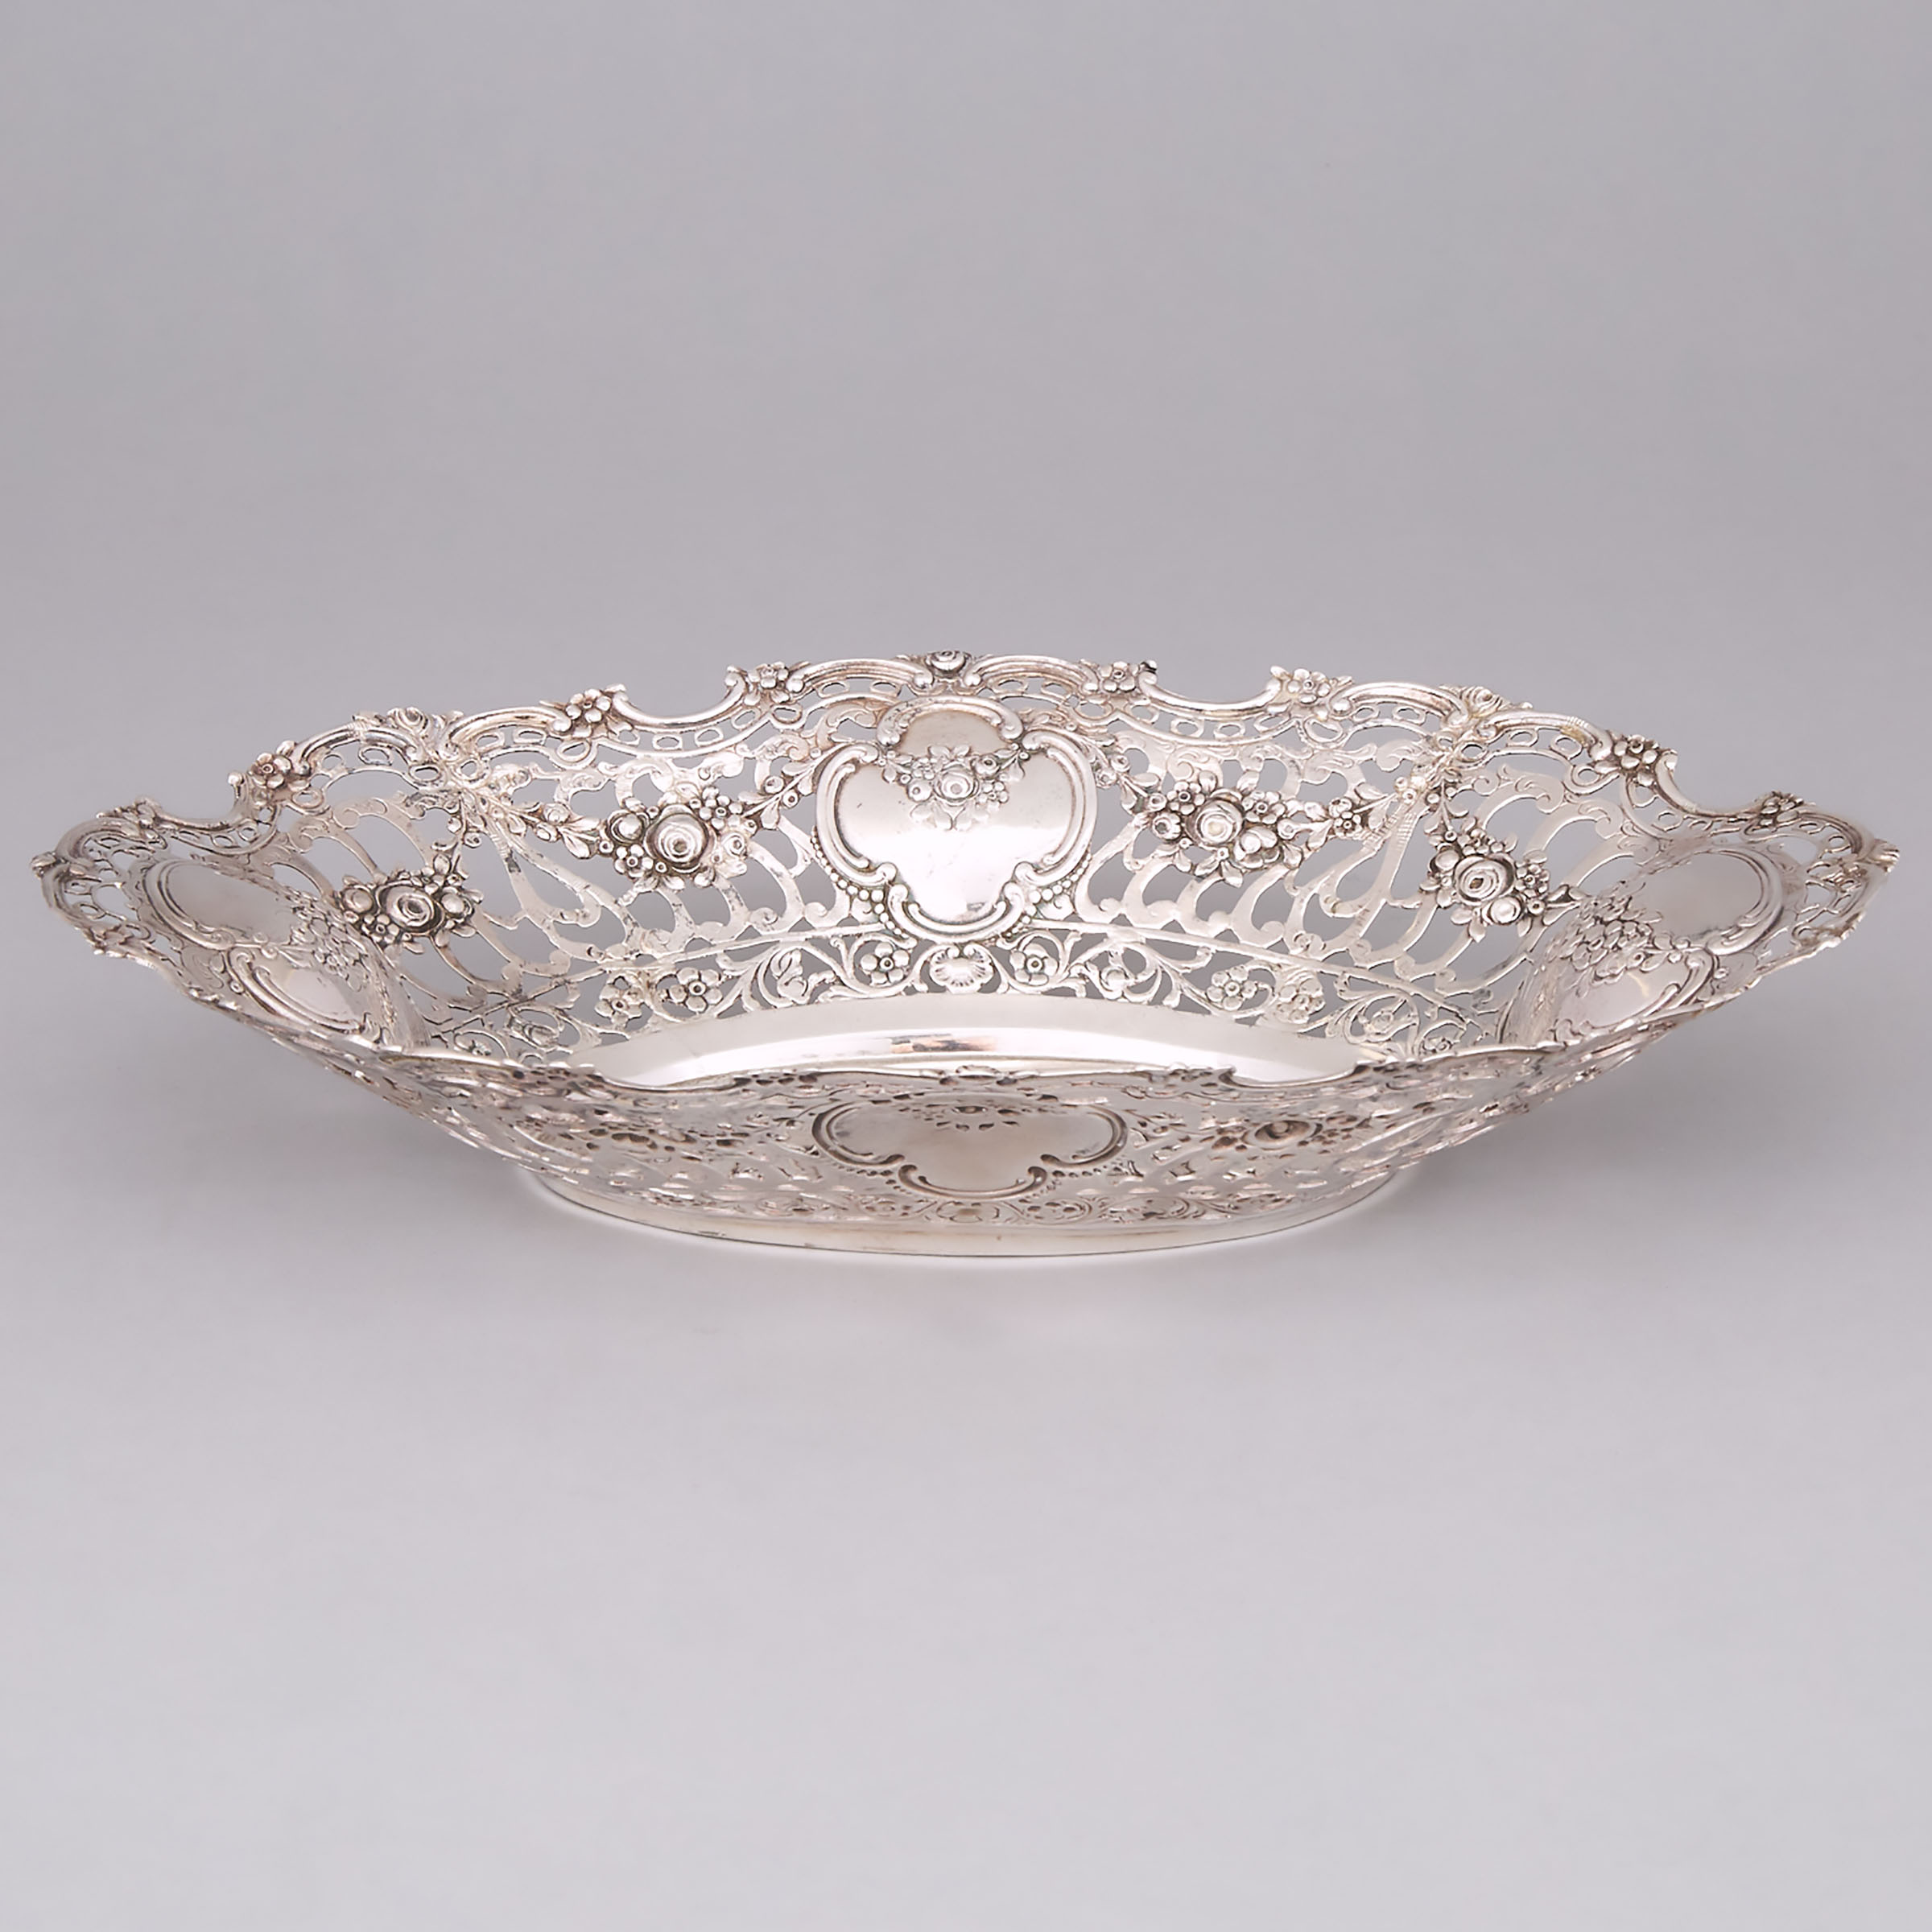 German Silver Moulded and Pierced Oval Dish, early 20th century